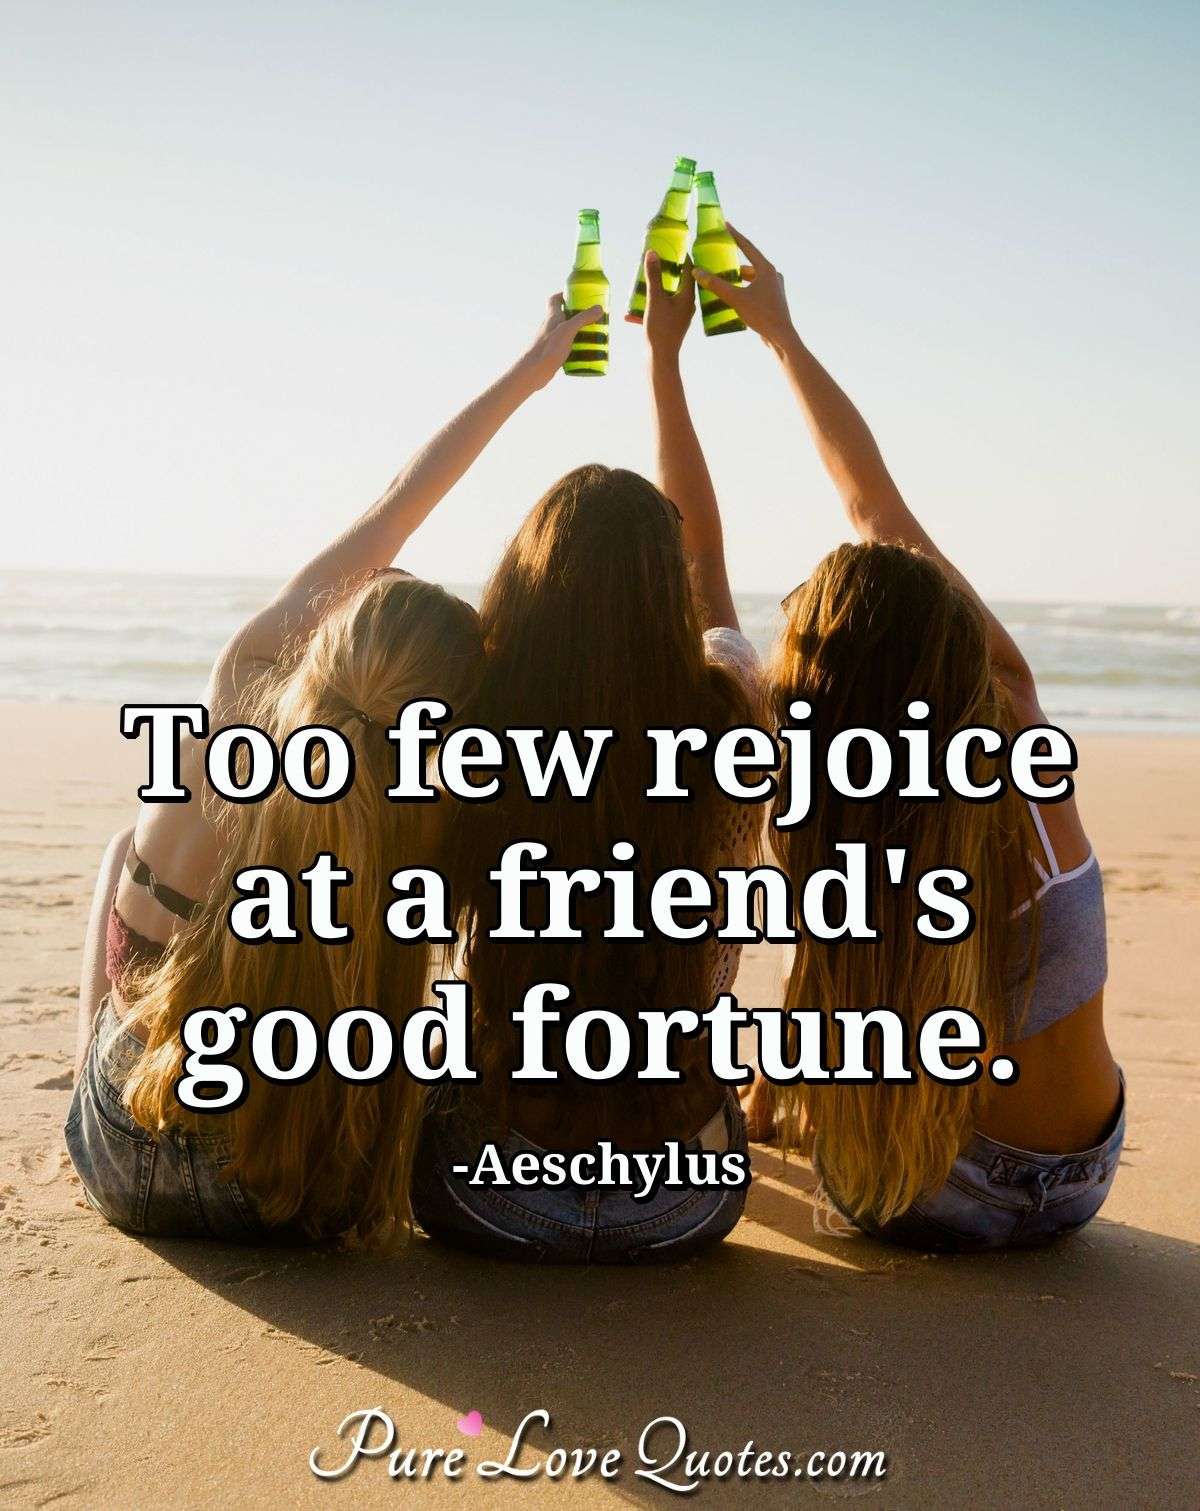 Too few rejoice at a friend's good fortune. - Aeschylus